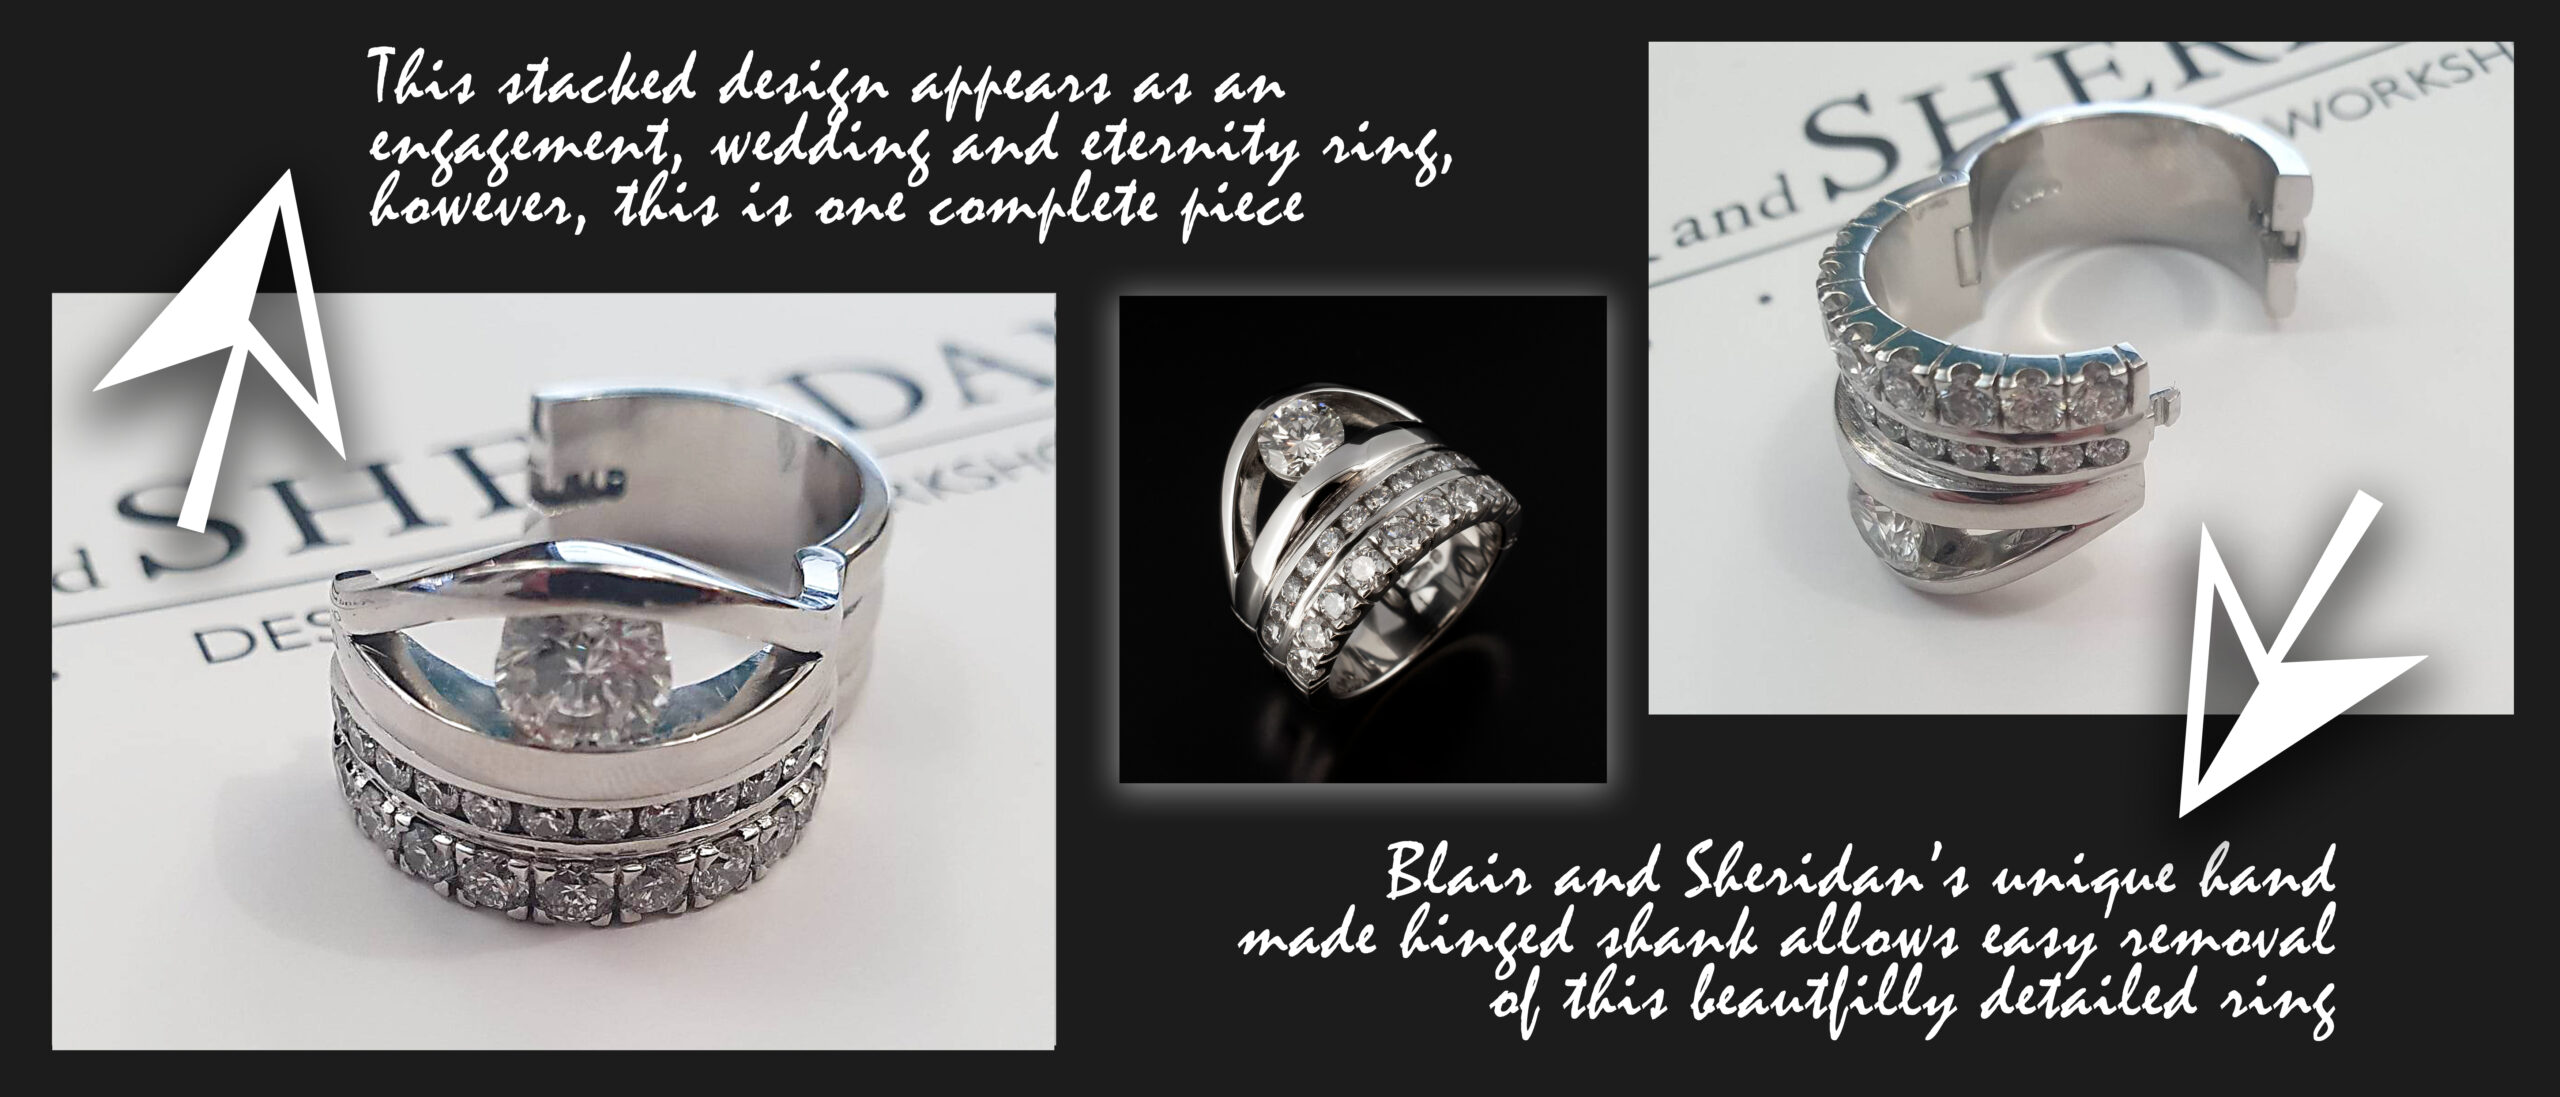 Blair and Sheridan hinged ring design incorporating an engagement, wedding and eternity rings into one piece